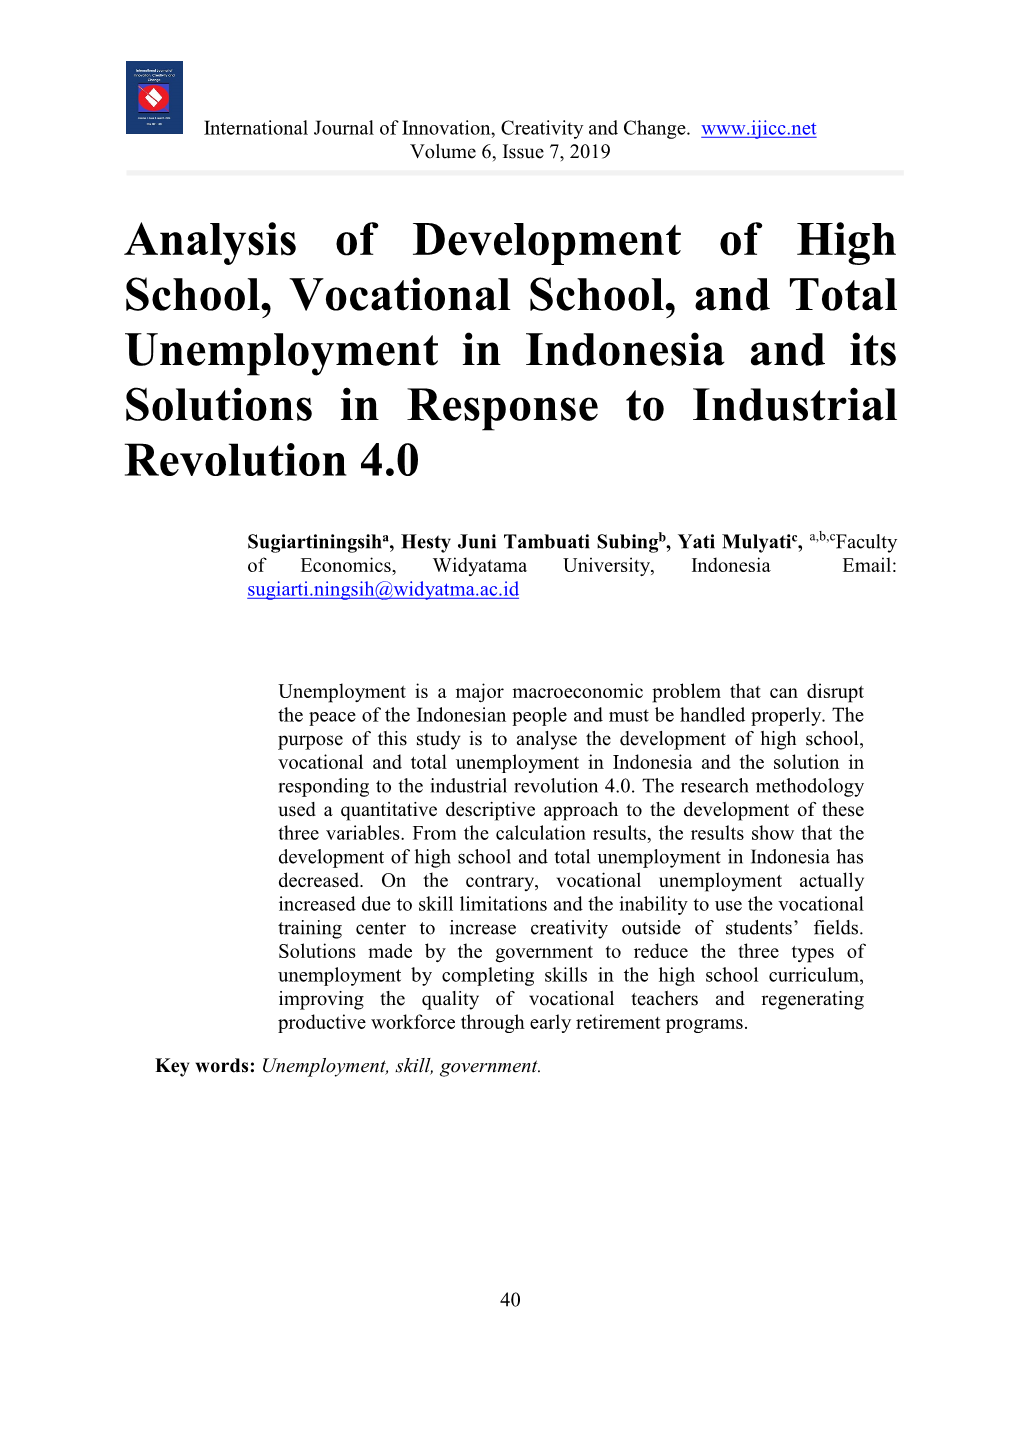 Analysis of Development of High School, Vocational School, and Total Unemployment in Indonesia and Its Solutions in Response to Industrial Revolution 4.0